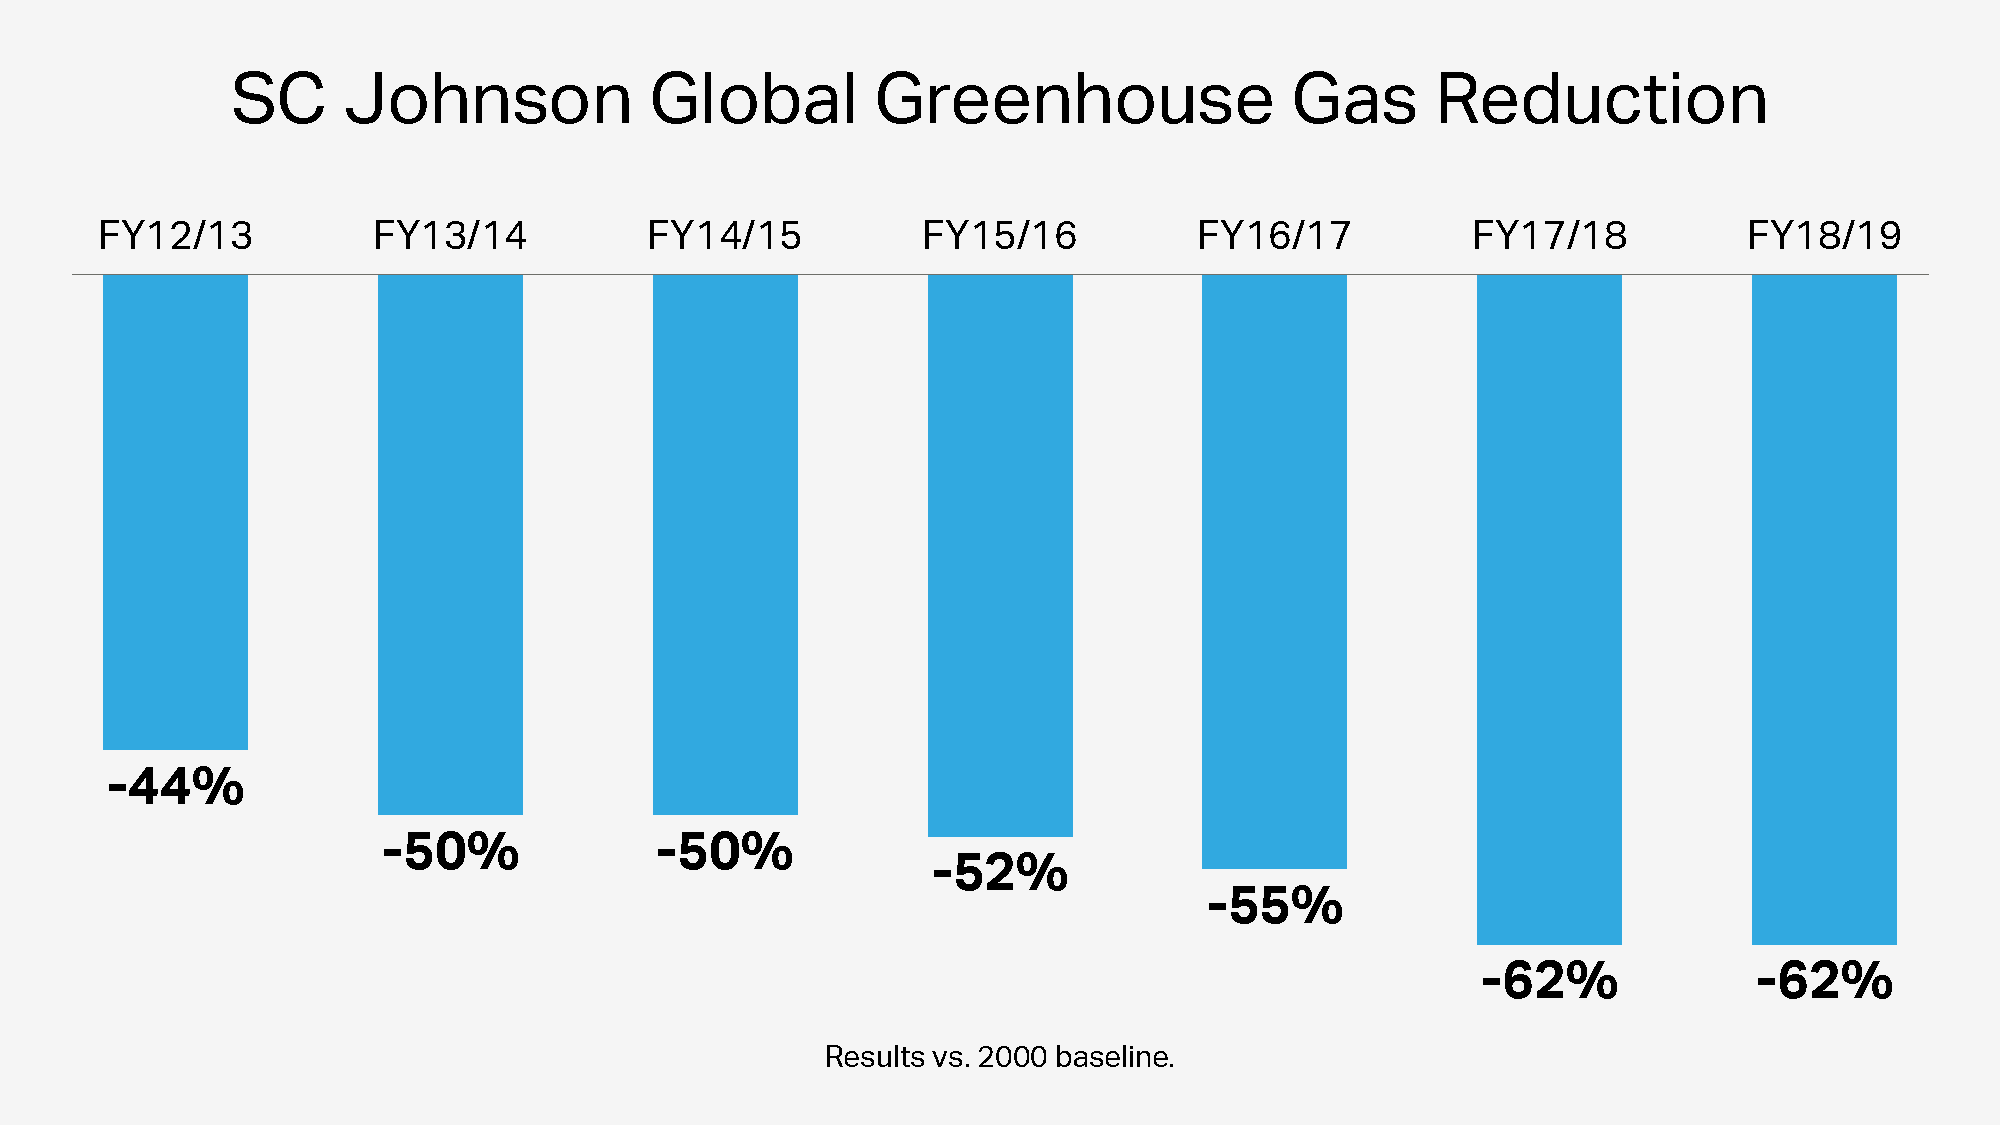 SC Johnson Global Greenhouse Gas Reduction Over the Years 